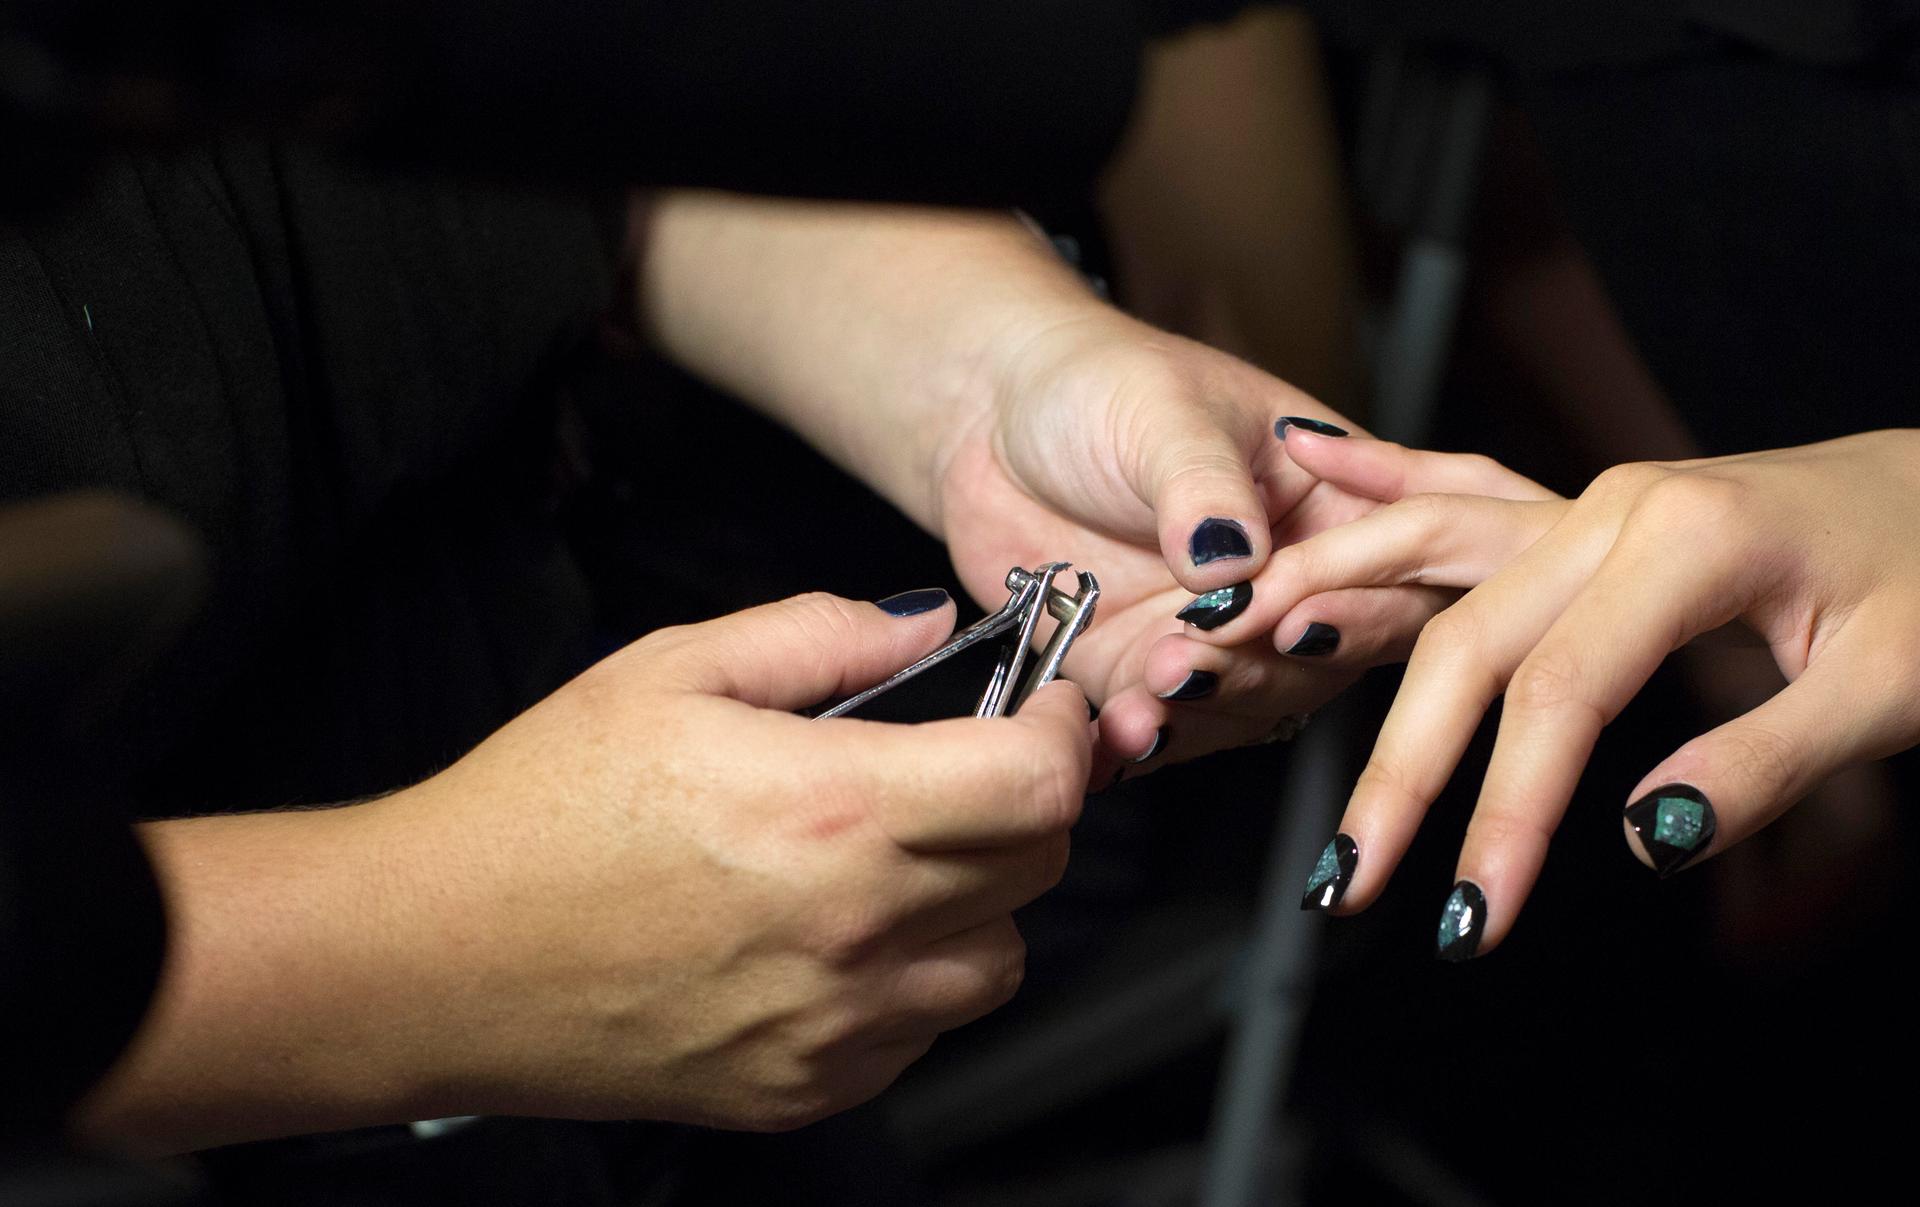 A model has her nails done backstage before the presentation of the Nicole Miller Spring/Summer 2013 collection during New York Fashion Week on September 7, 2012.